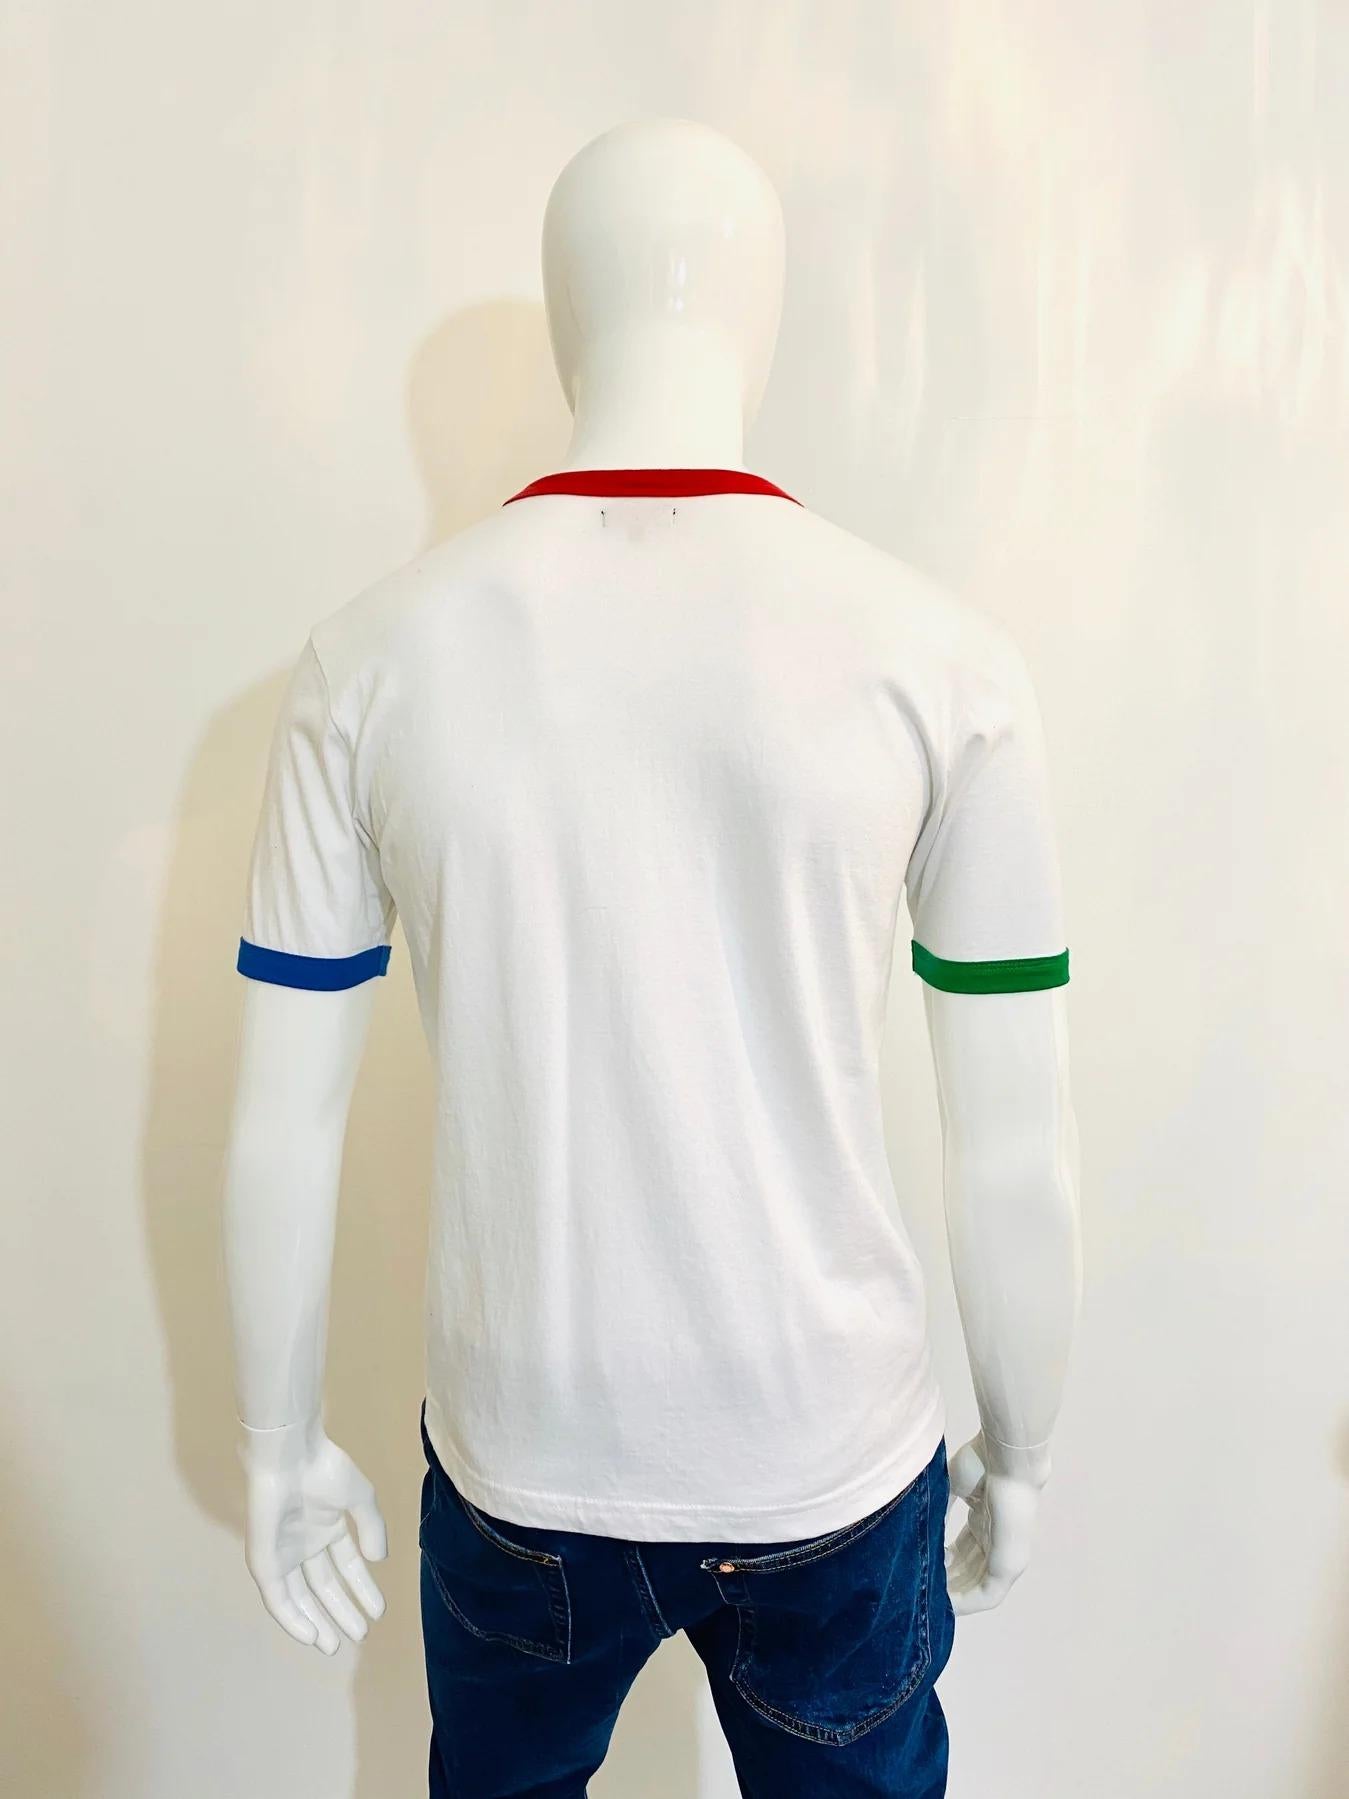 Freemans Sporting Club Cotton T-Shirt.

Fresh white cotton t-shirt with coloured trim. Neckline in bright red. arm trim in blue and other arm trim in green.

Additional information:
Size – XS
Condition – Very Good